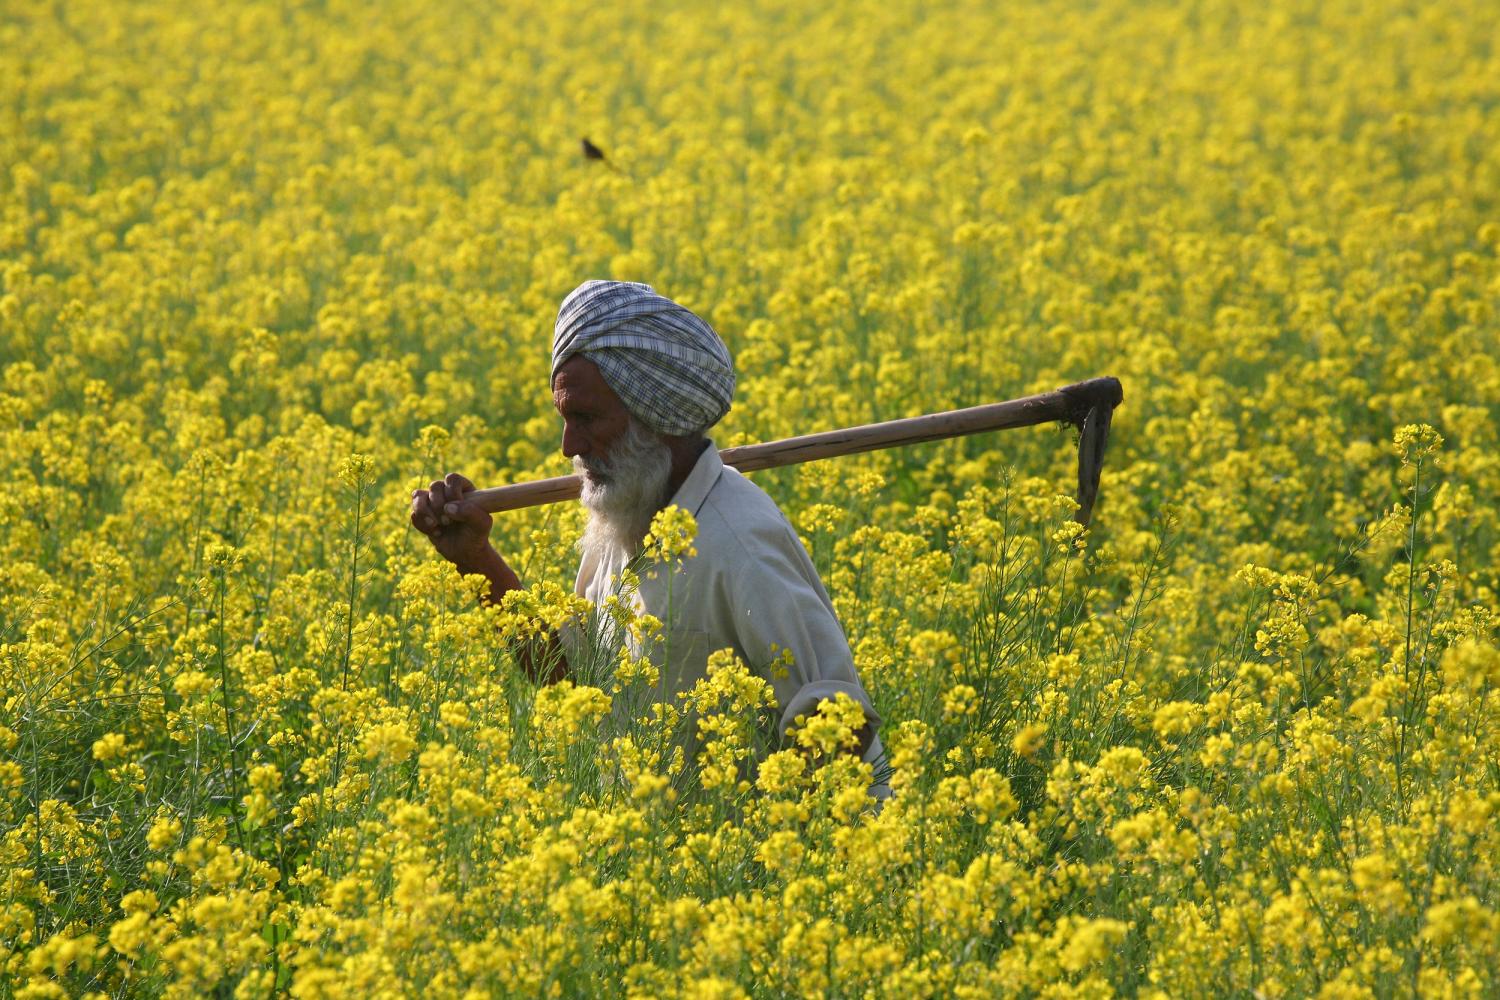 A farmer walks through a mustard field at Ghaduwan village in the northern Indian state of Punjab December 16, 2009.  REUTERS/Ajay Verma (INDIA - Tags: BUSINESS POLITICS AGRICULTURE SOCIETY) - GM1E5CG1GI901